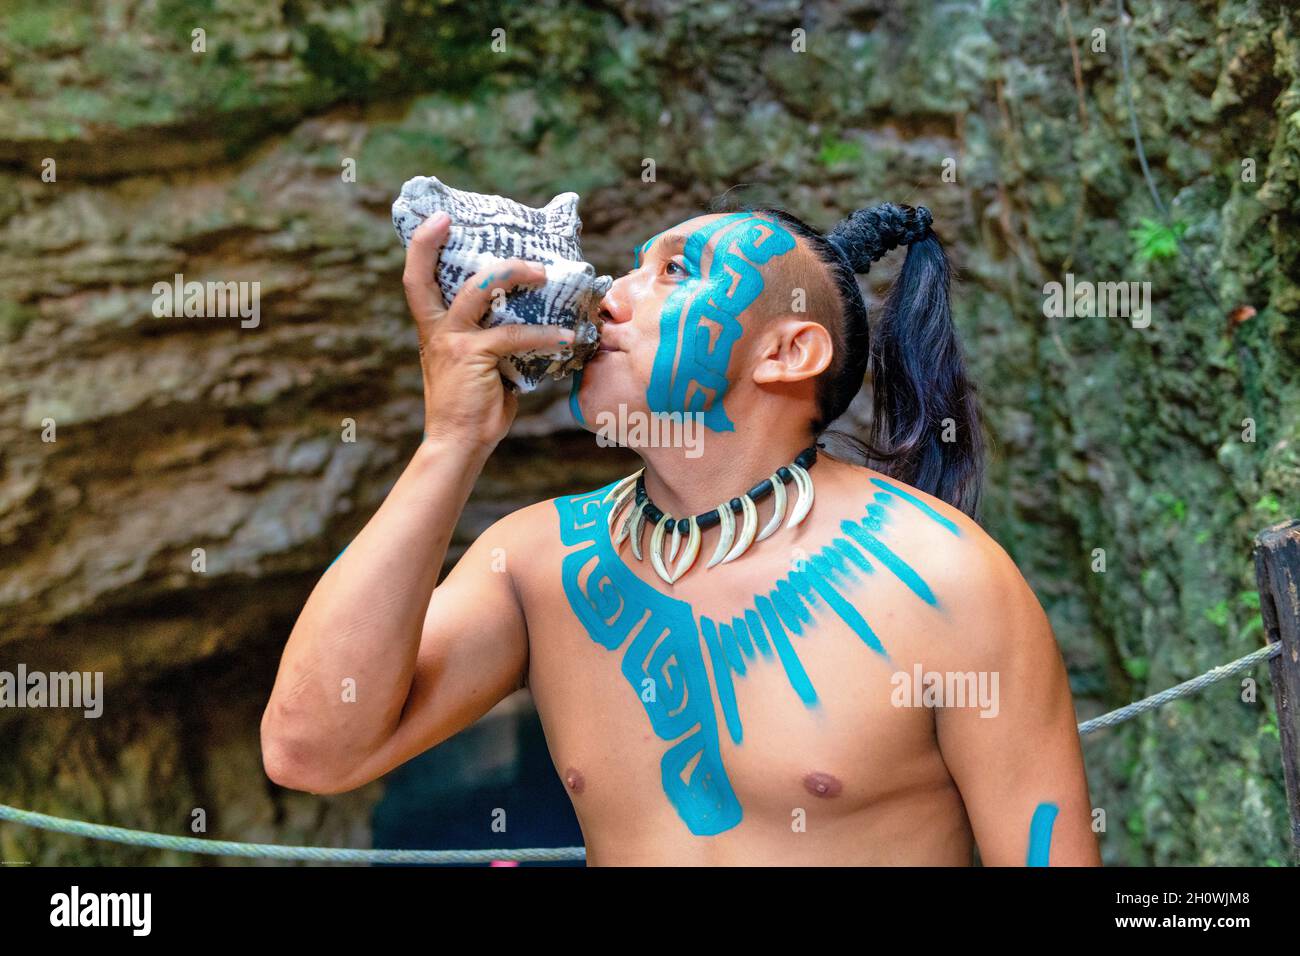 Body paint in Mayan man who is blowing a seashell, Mexico, 2021 Stock Photo